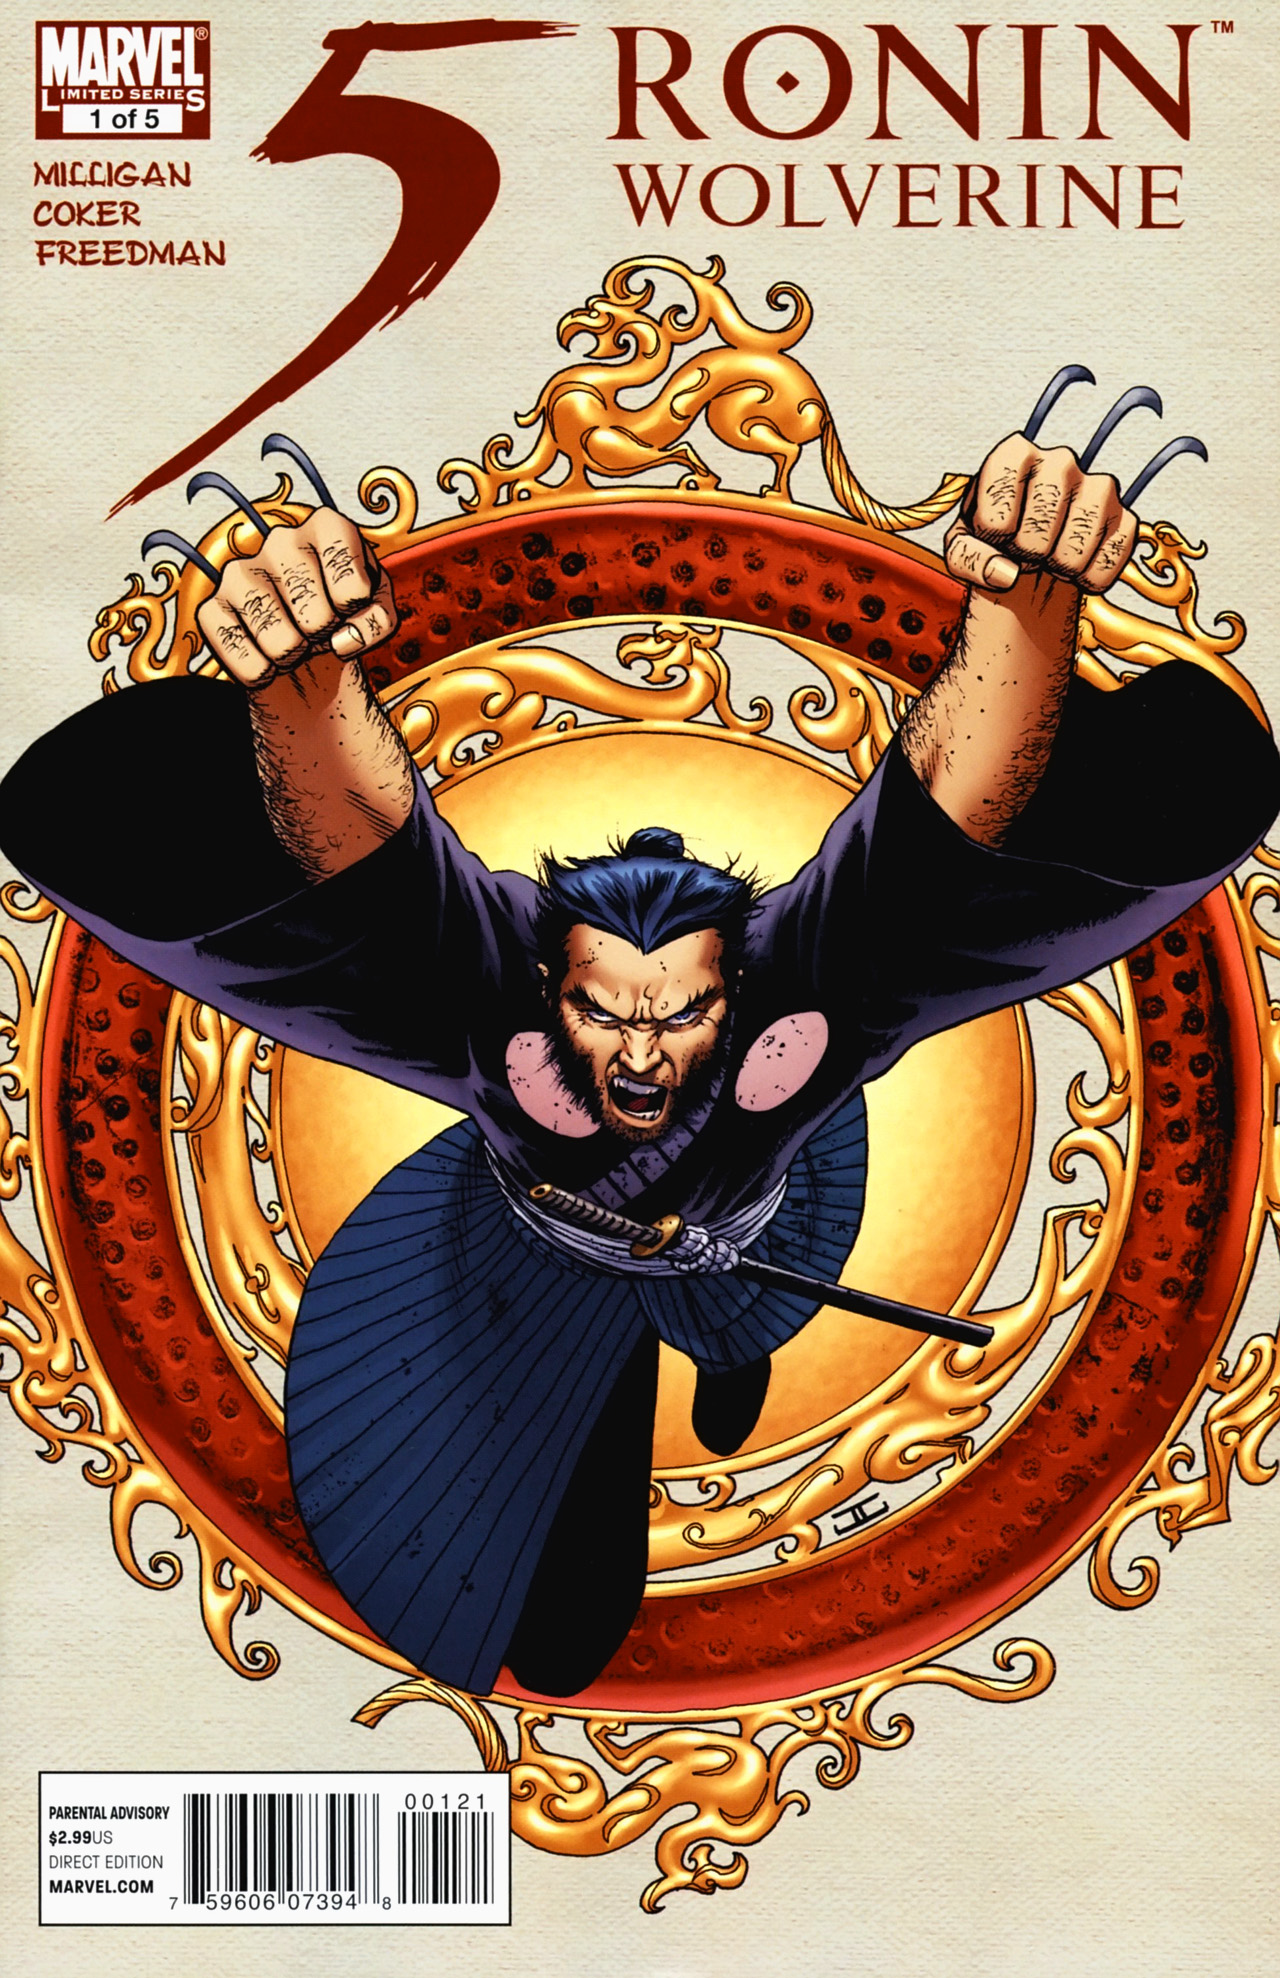 5 Ronin #1 - Chapter One: The Way Of The One - Wolverine 